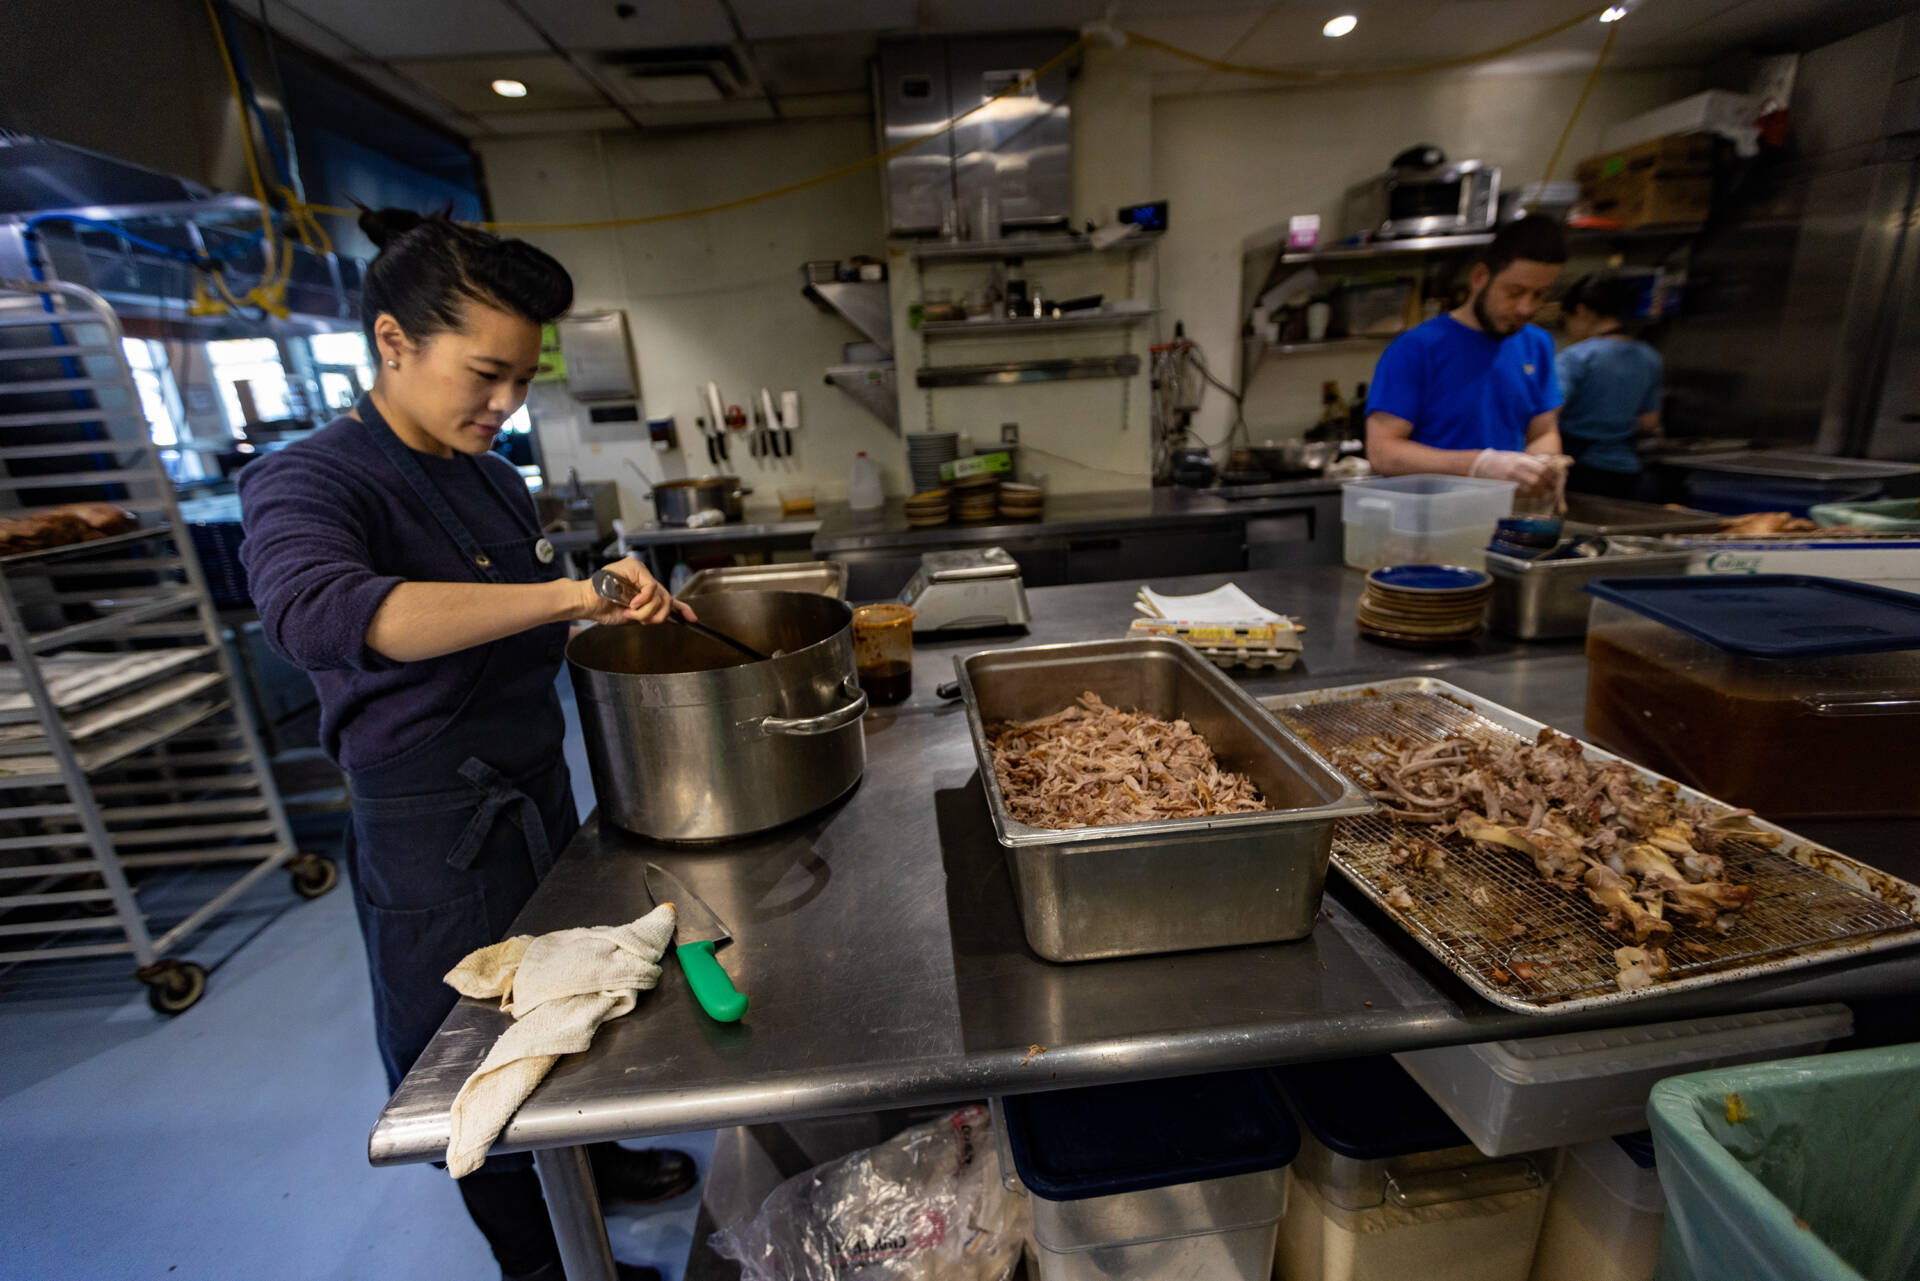 Pagu owner Tracy Chang prepares mapo tofu for for a dinner event later that evening. (Jesse Costa/WBUR)